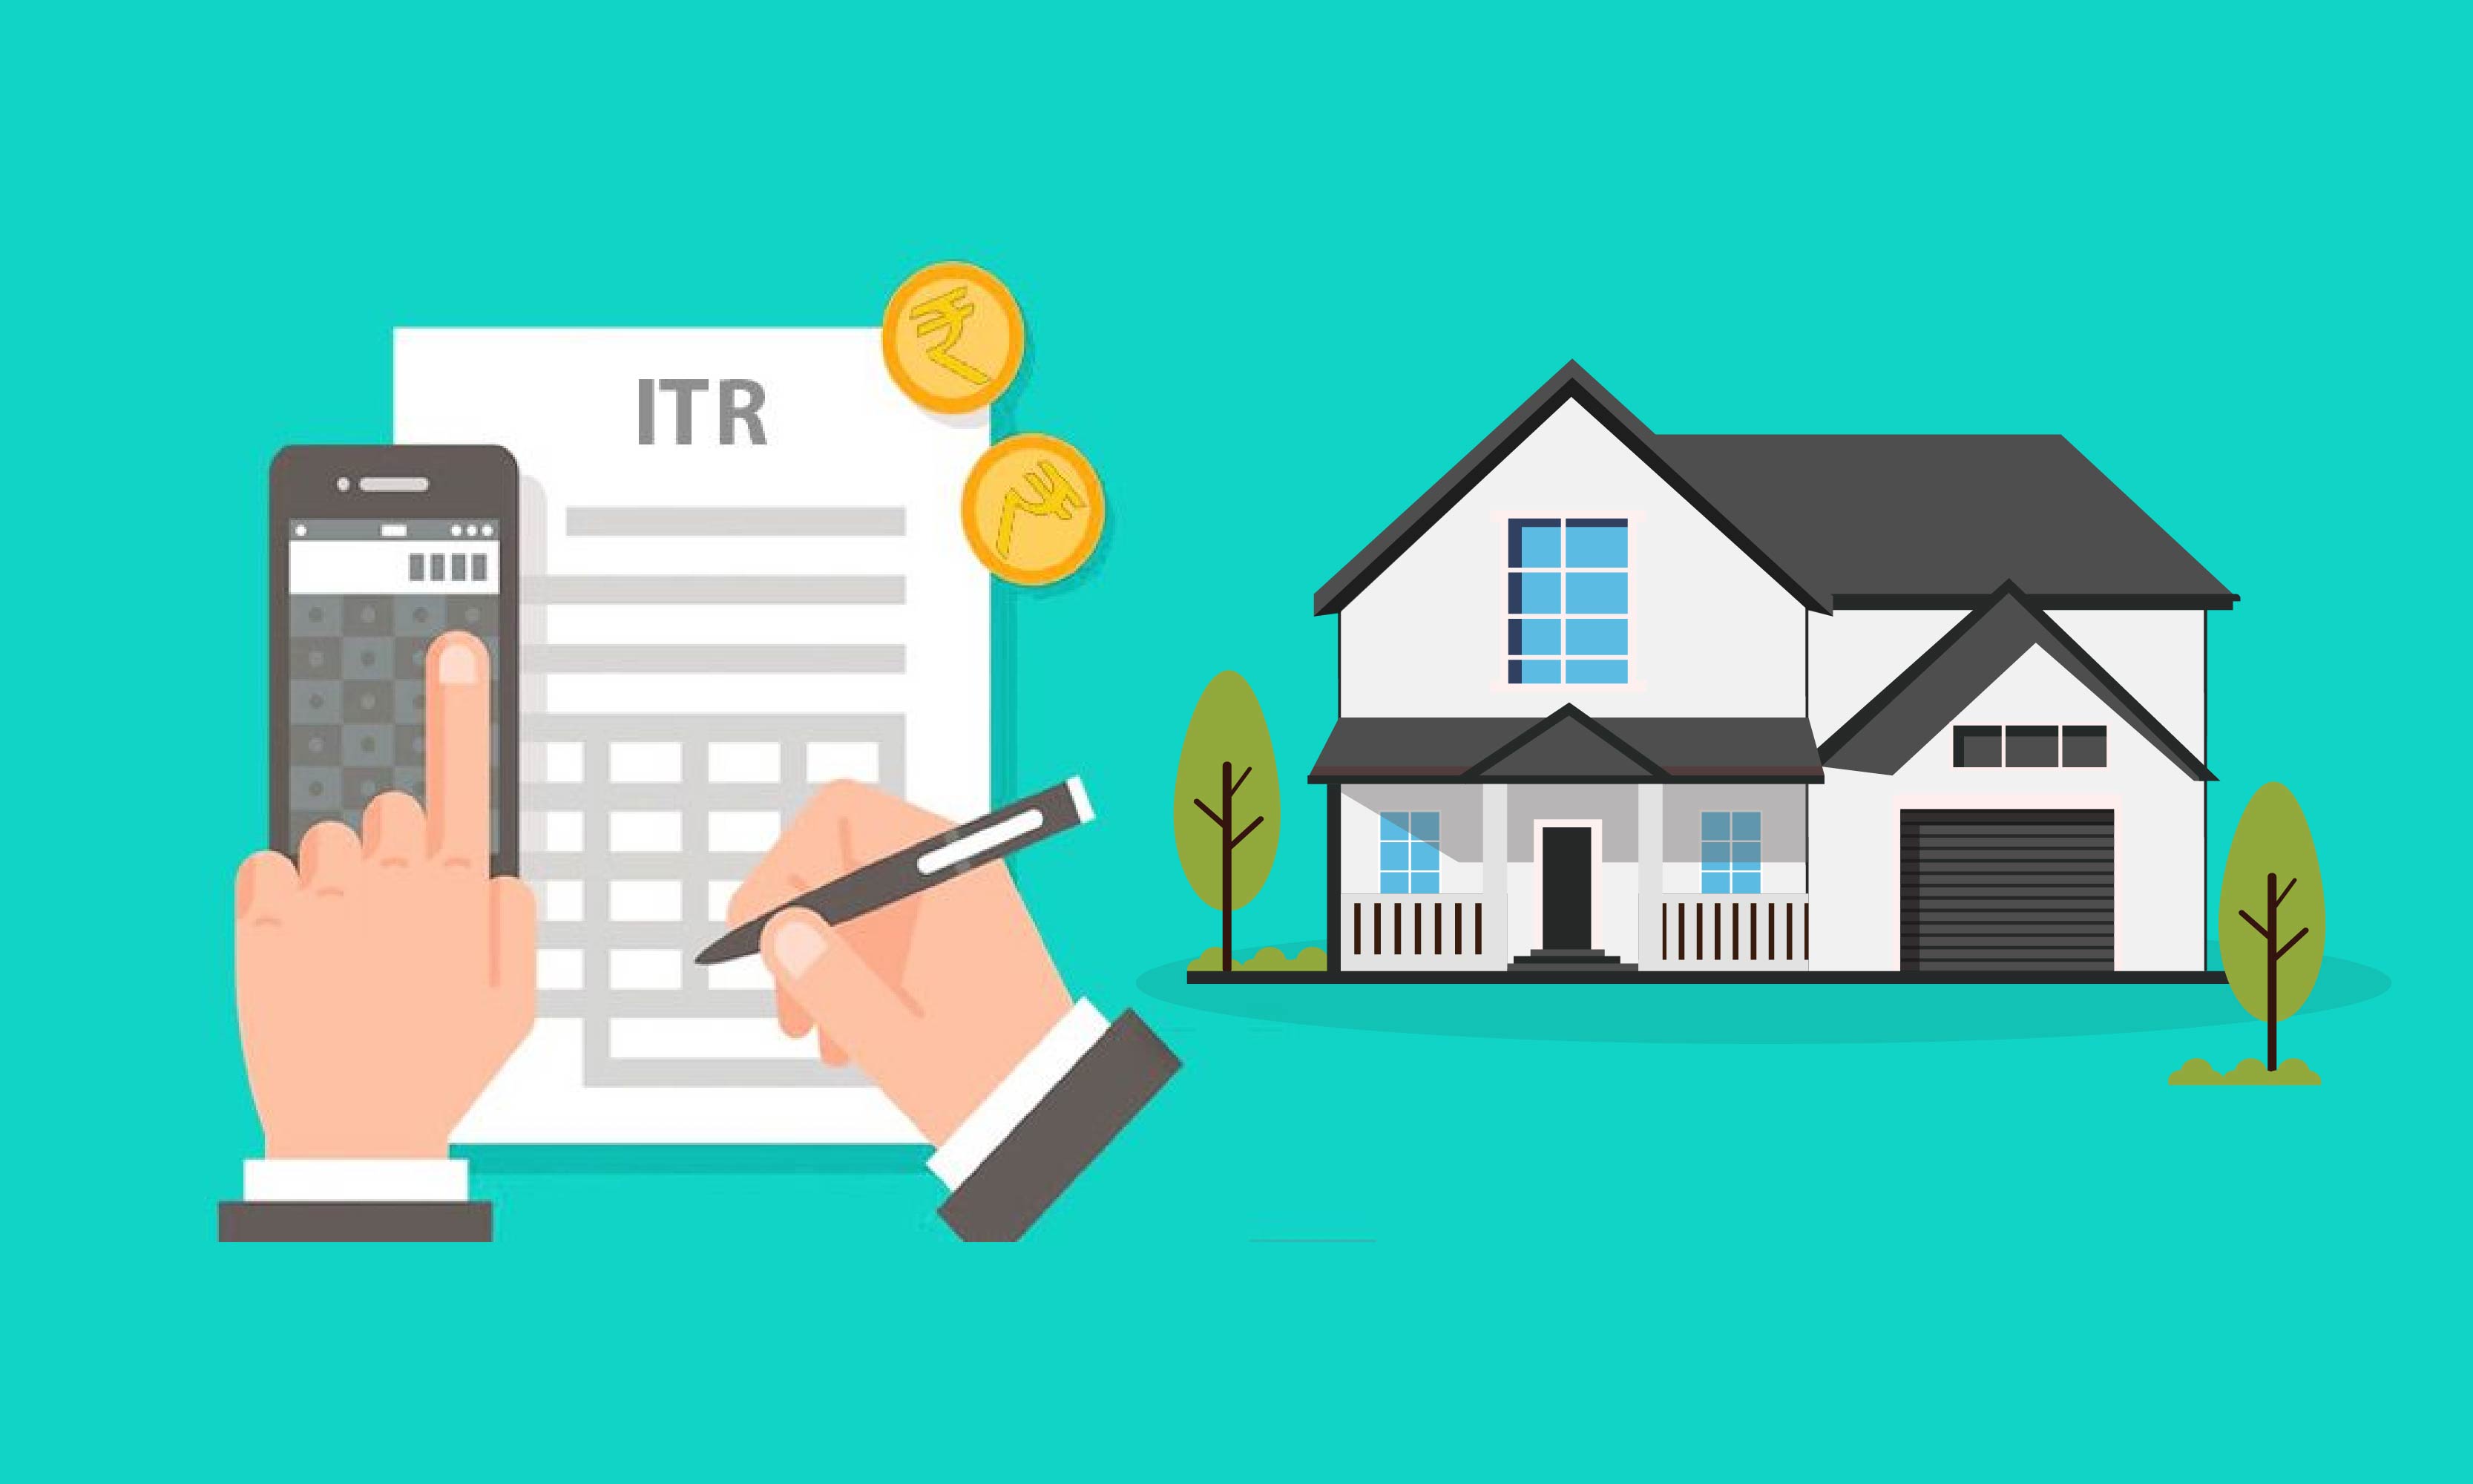 Benefits of Filing an ITR for Home Loans